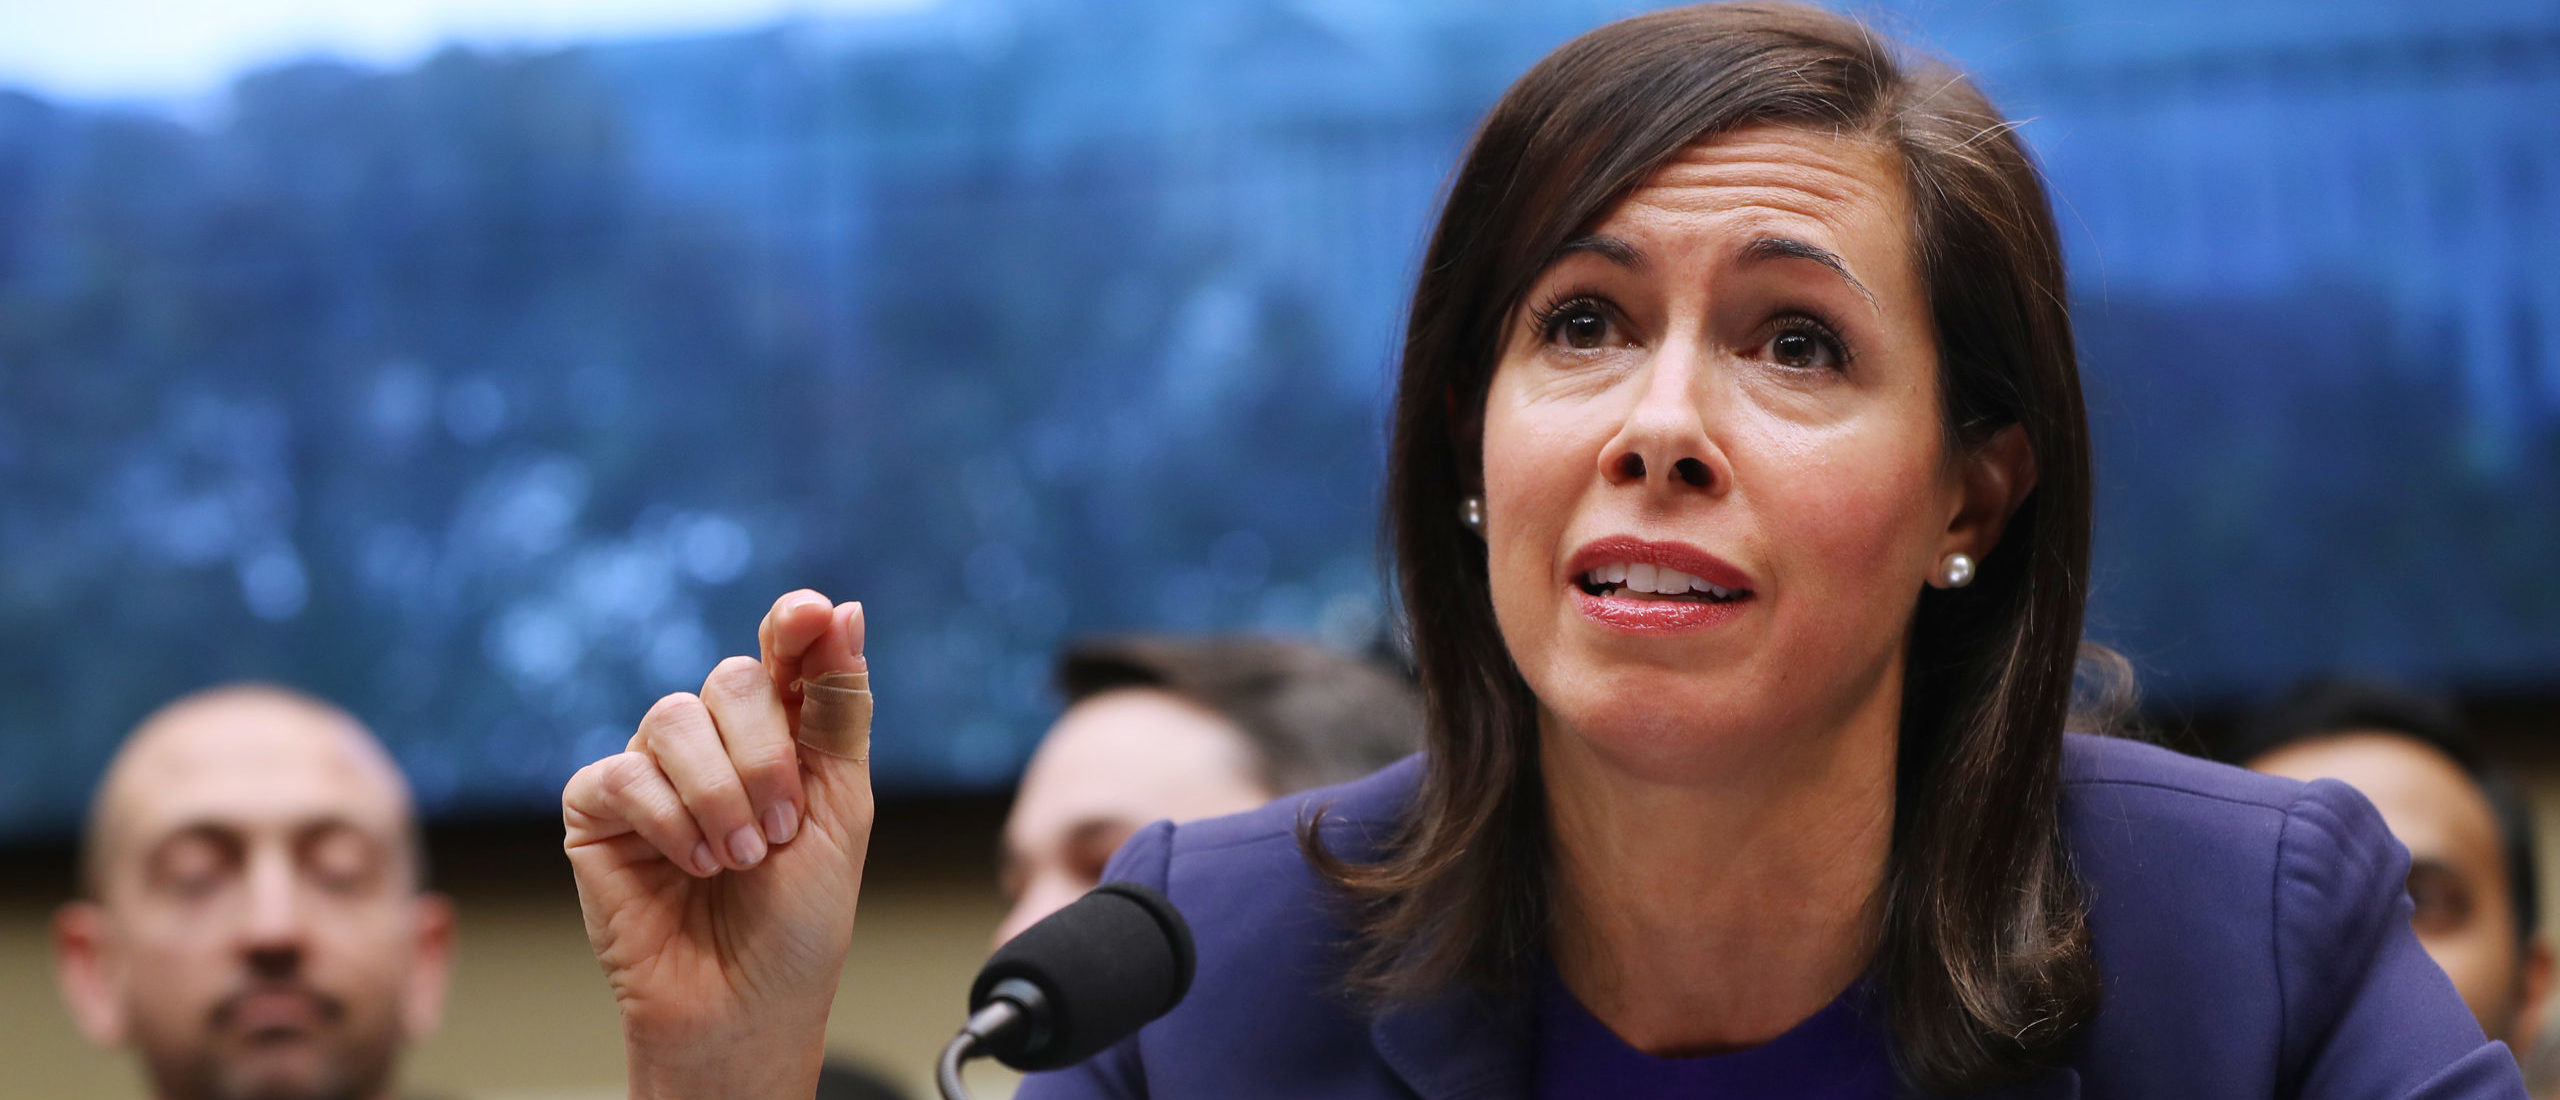 Federal Communication Commission Chairwoman Jessica Rosenworcel testifies before the House Energy and Commerce Committee's Communications and Technology Subcommittee. (Photo by Chip Somodevilla/Getty Images)